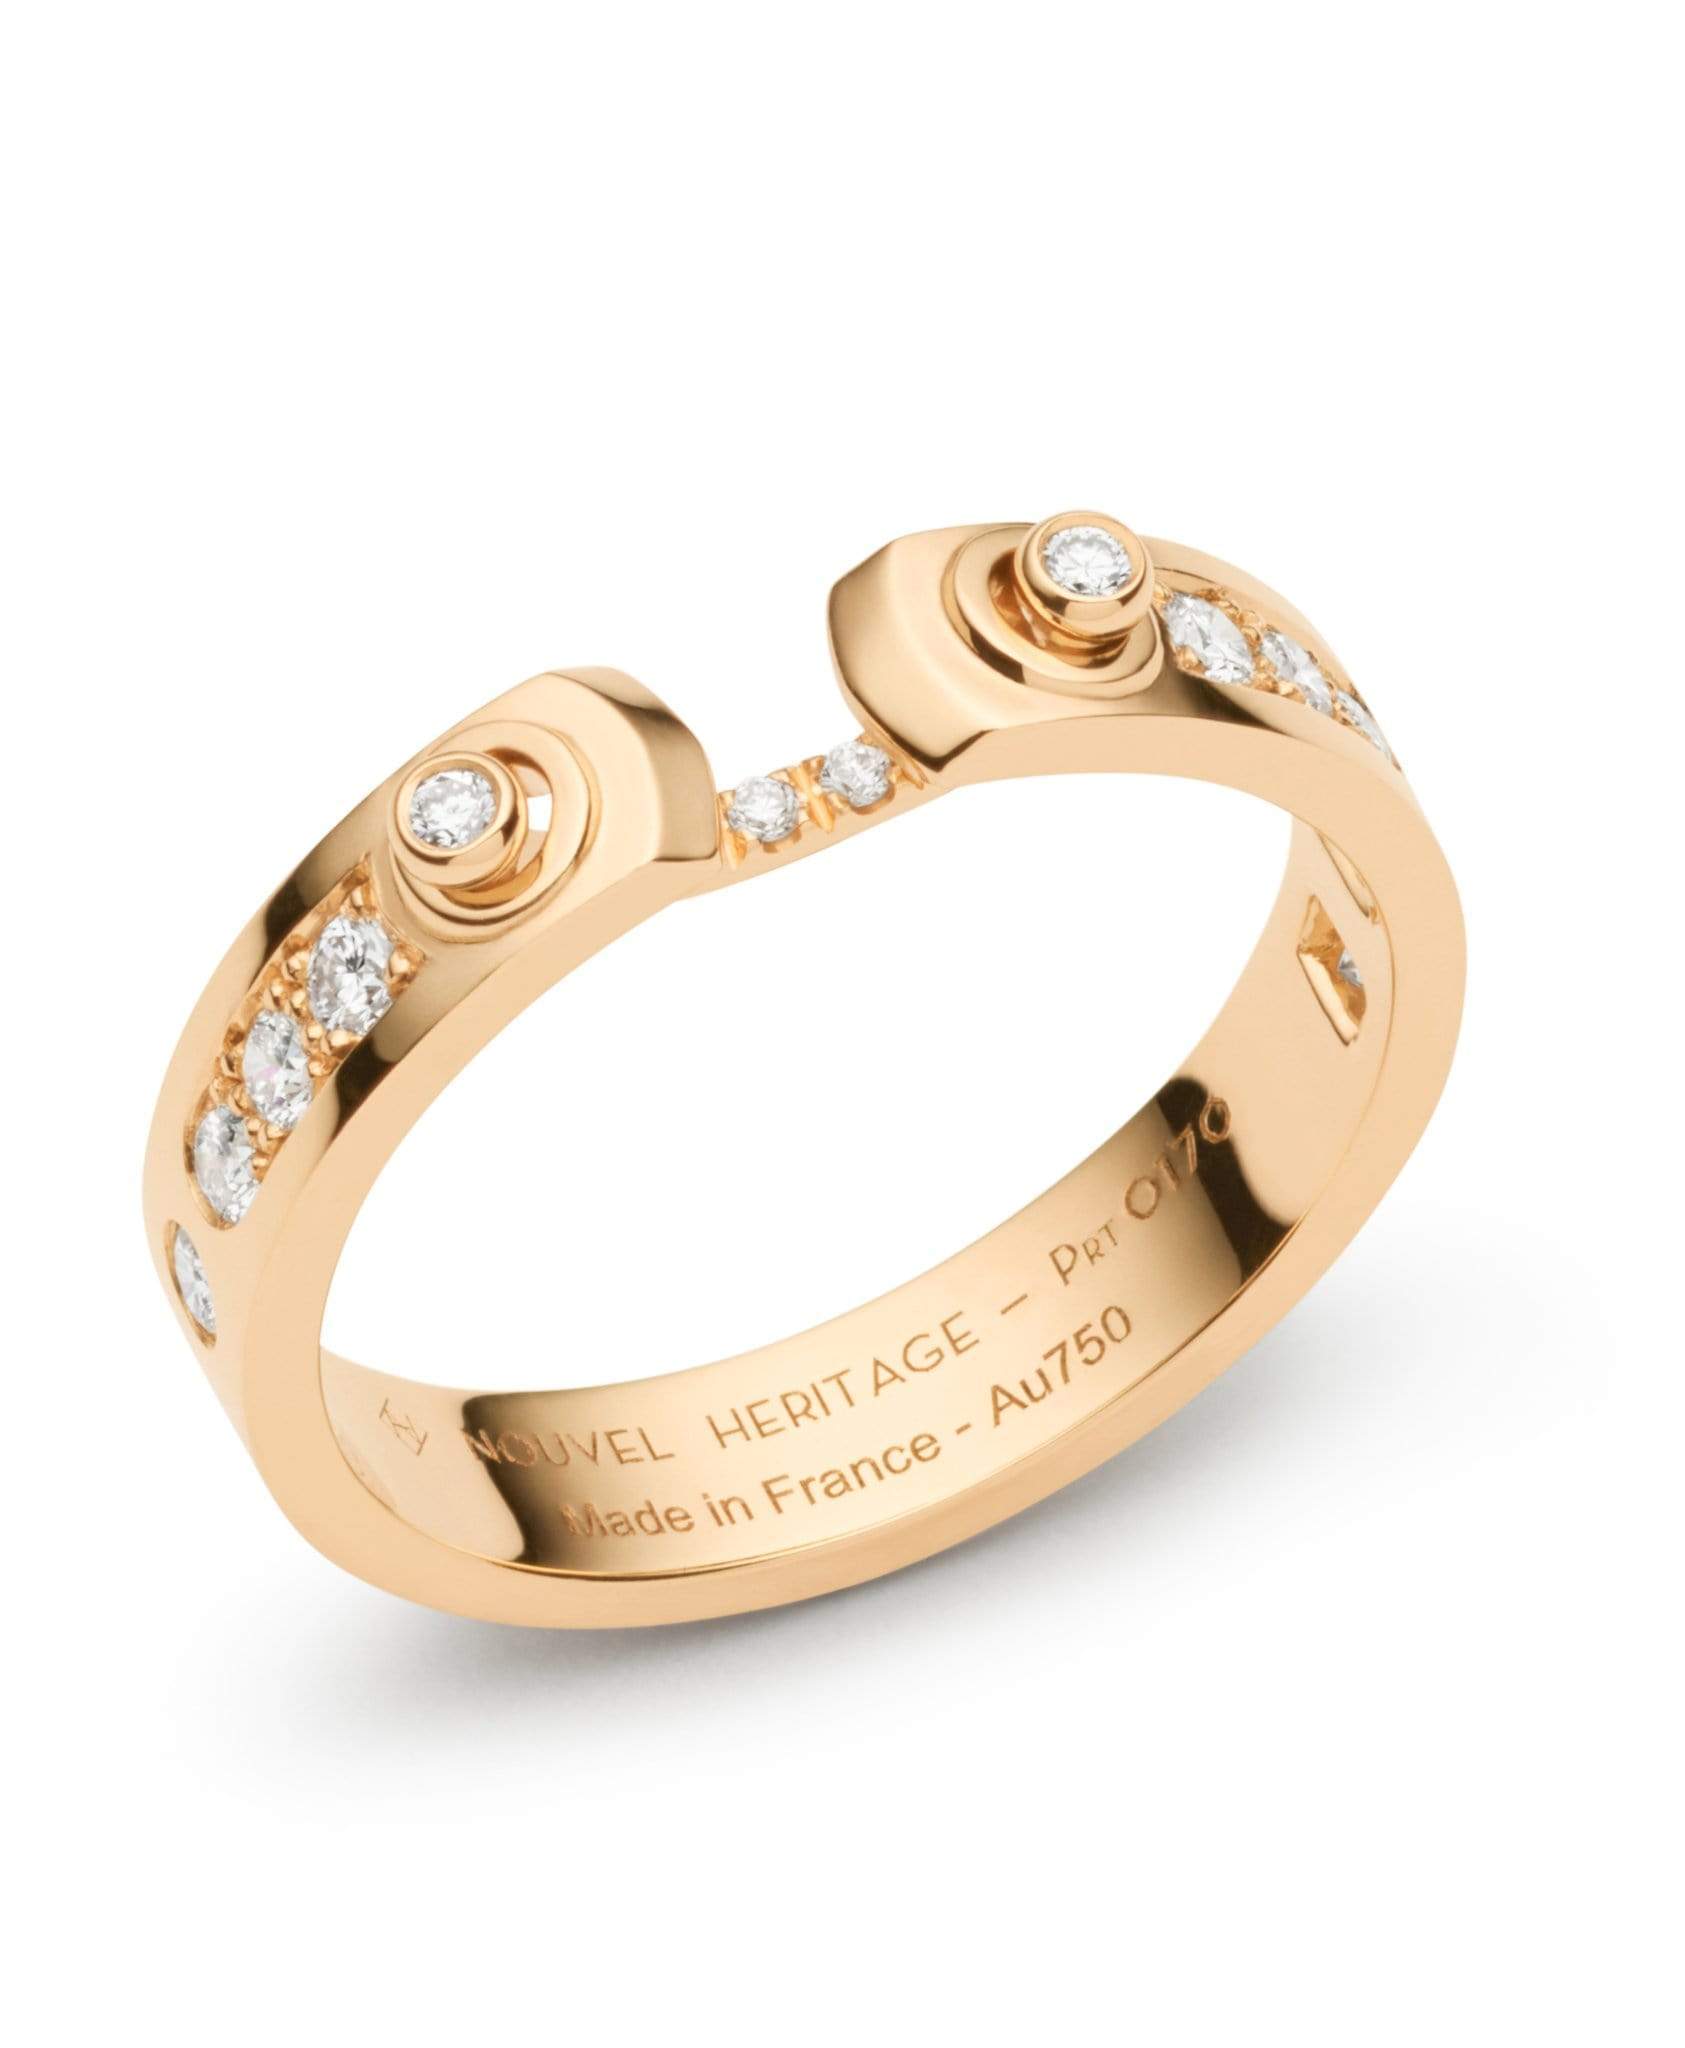 Tuxedo Mood Ring: Discover Luxury Fine Jewelry | Nouvel Heritage || Yellow Gold